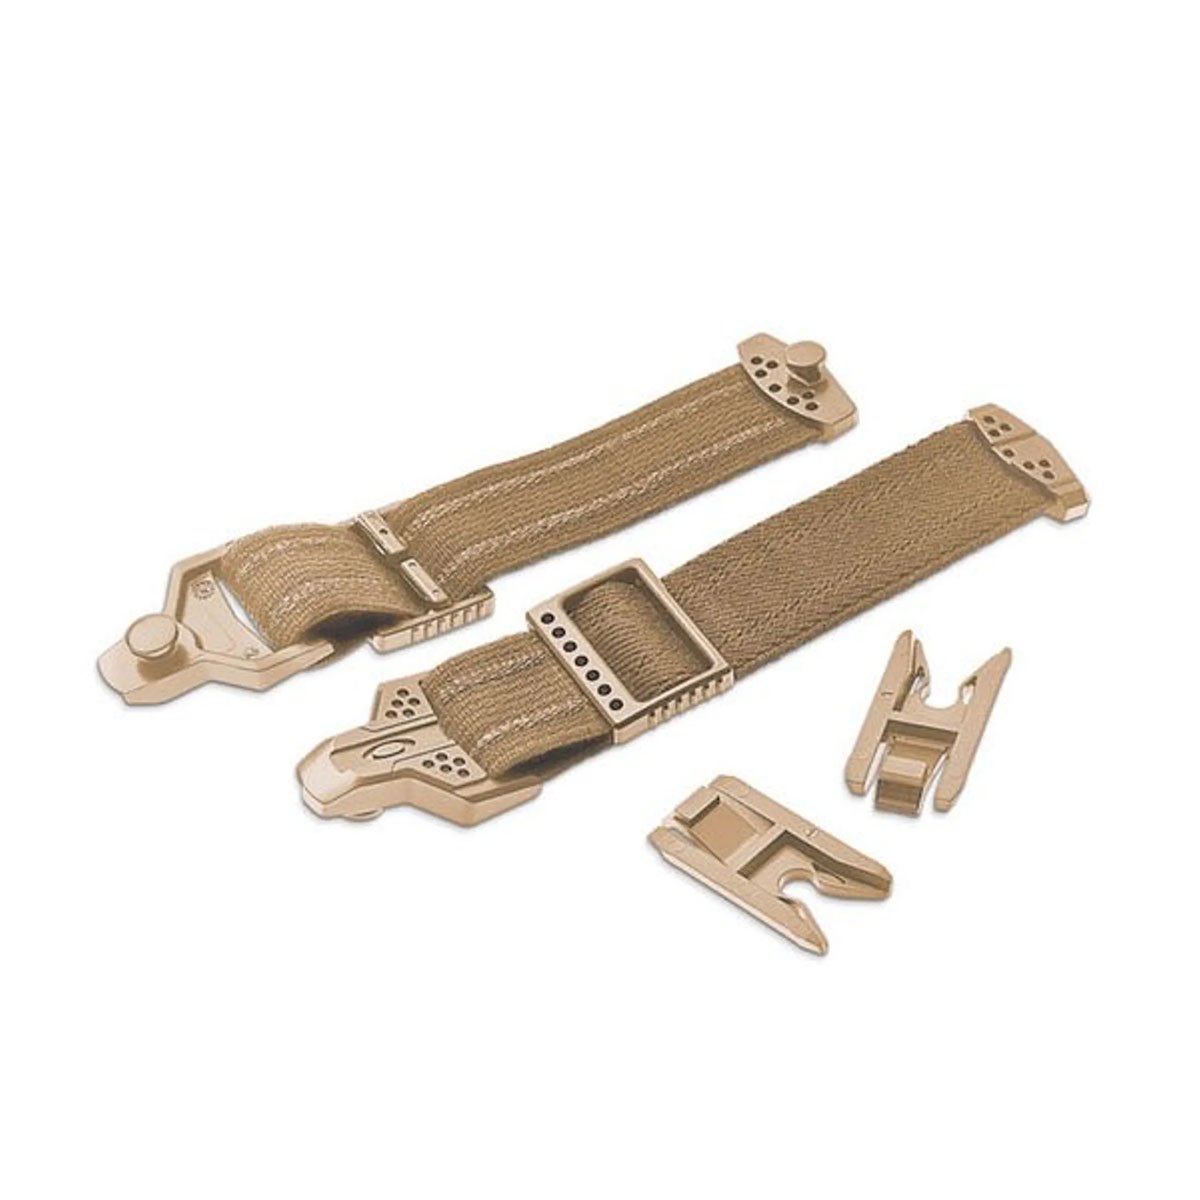 SI Goggle 2.0 Opscore Strap Adapter Tan